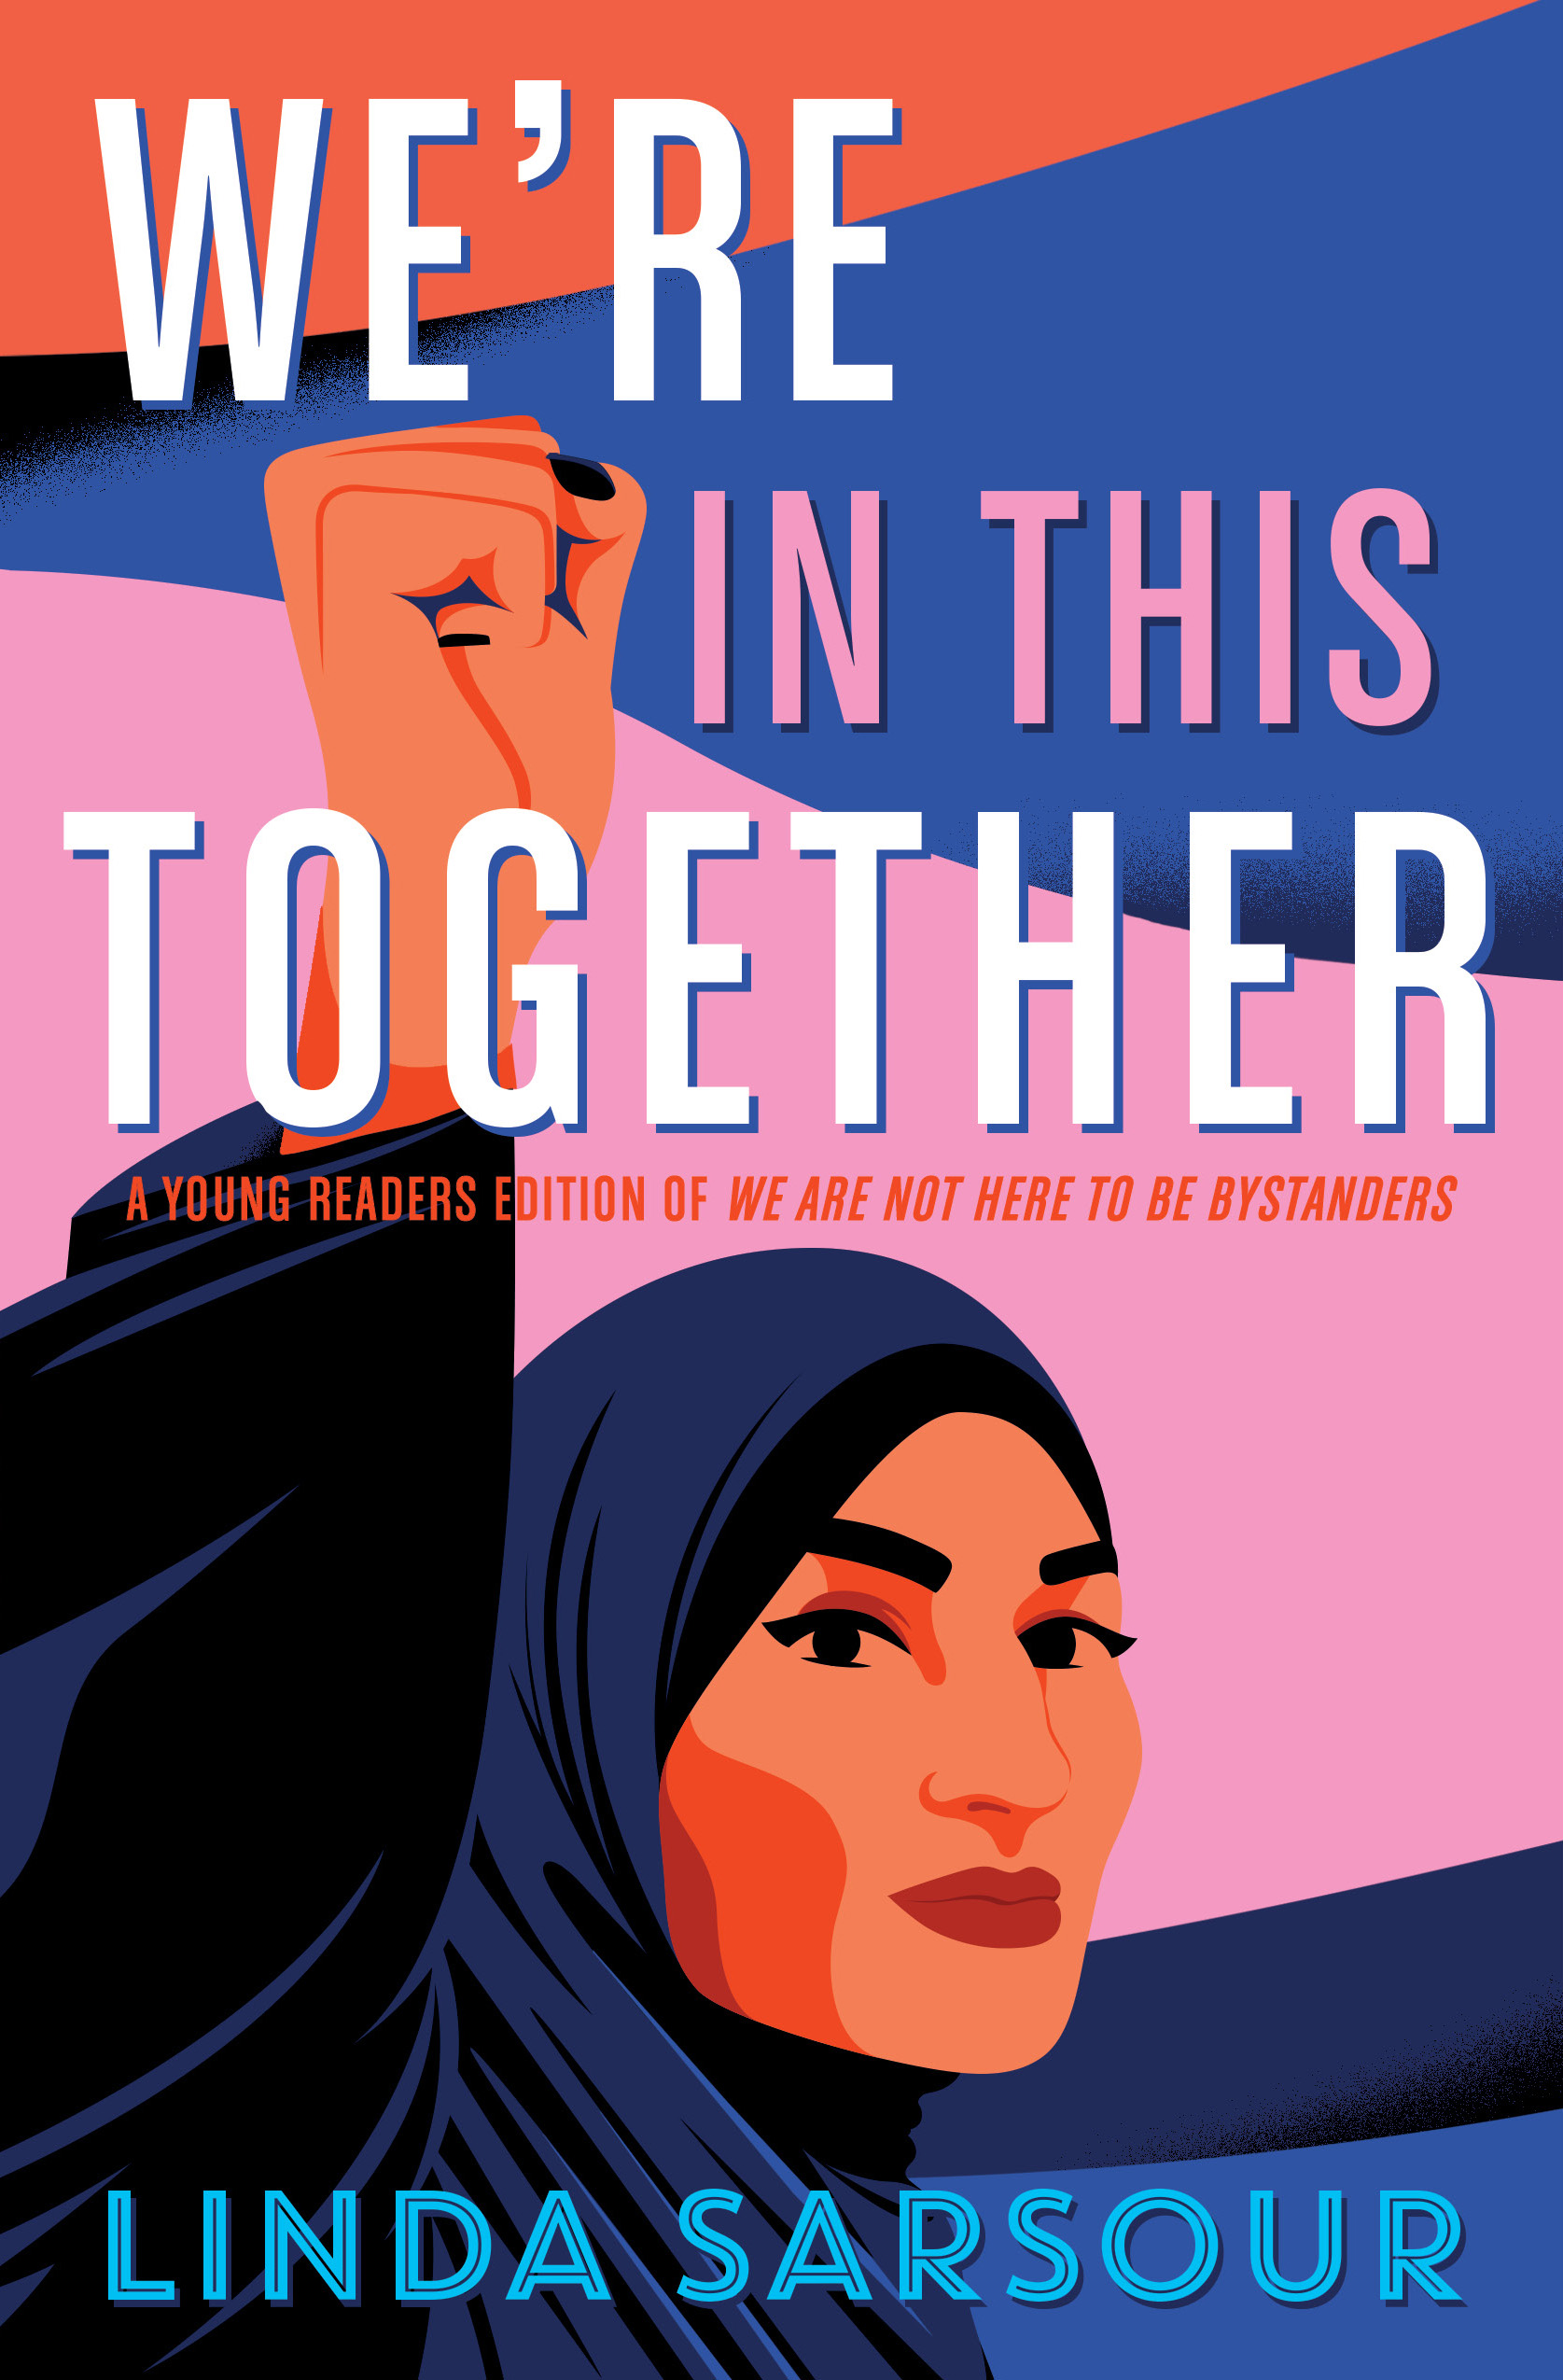 We’re in This Together, a guest post by Linda Sarsour